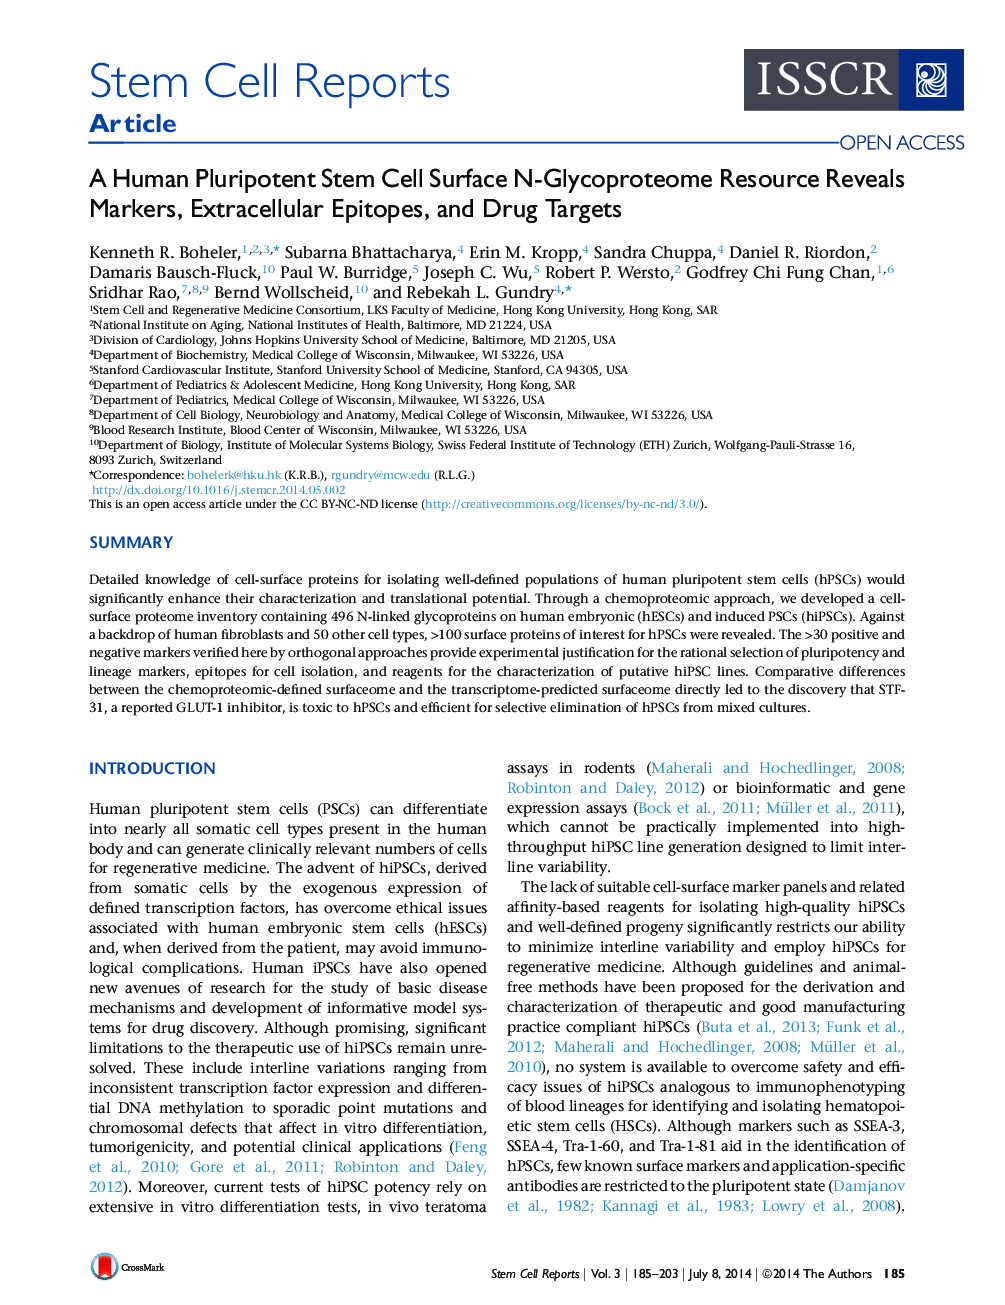 A Human Pluripotent Stem Cell Surface N-Glycoproteome Resource Reveals Markers, Extracellular Epitopes, and Drug Targets 